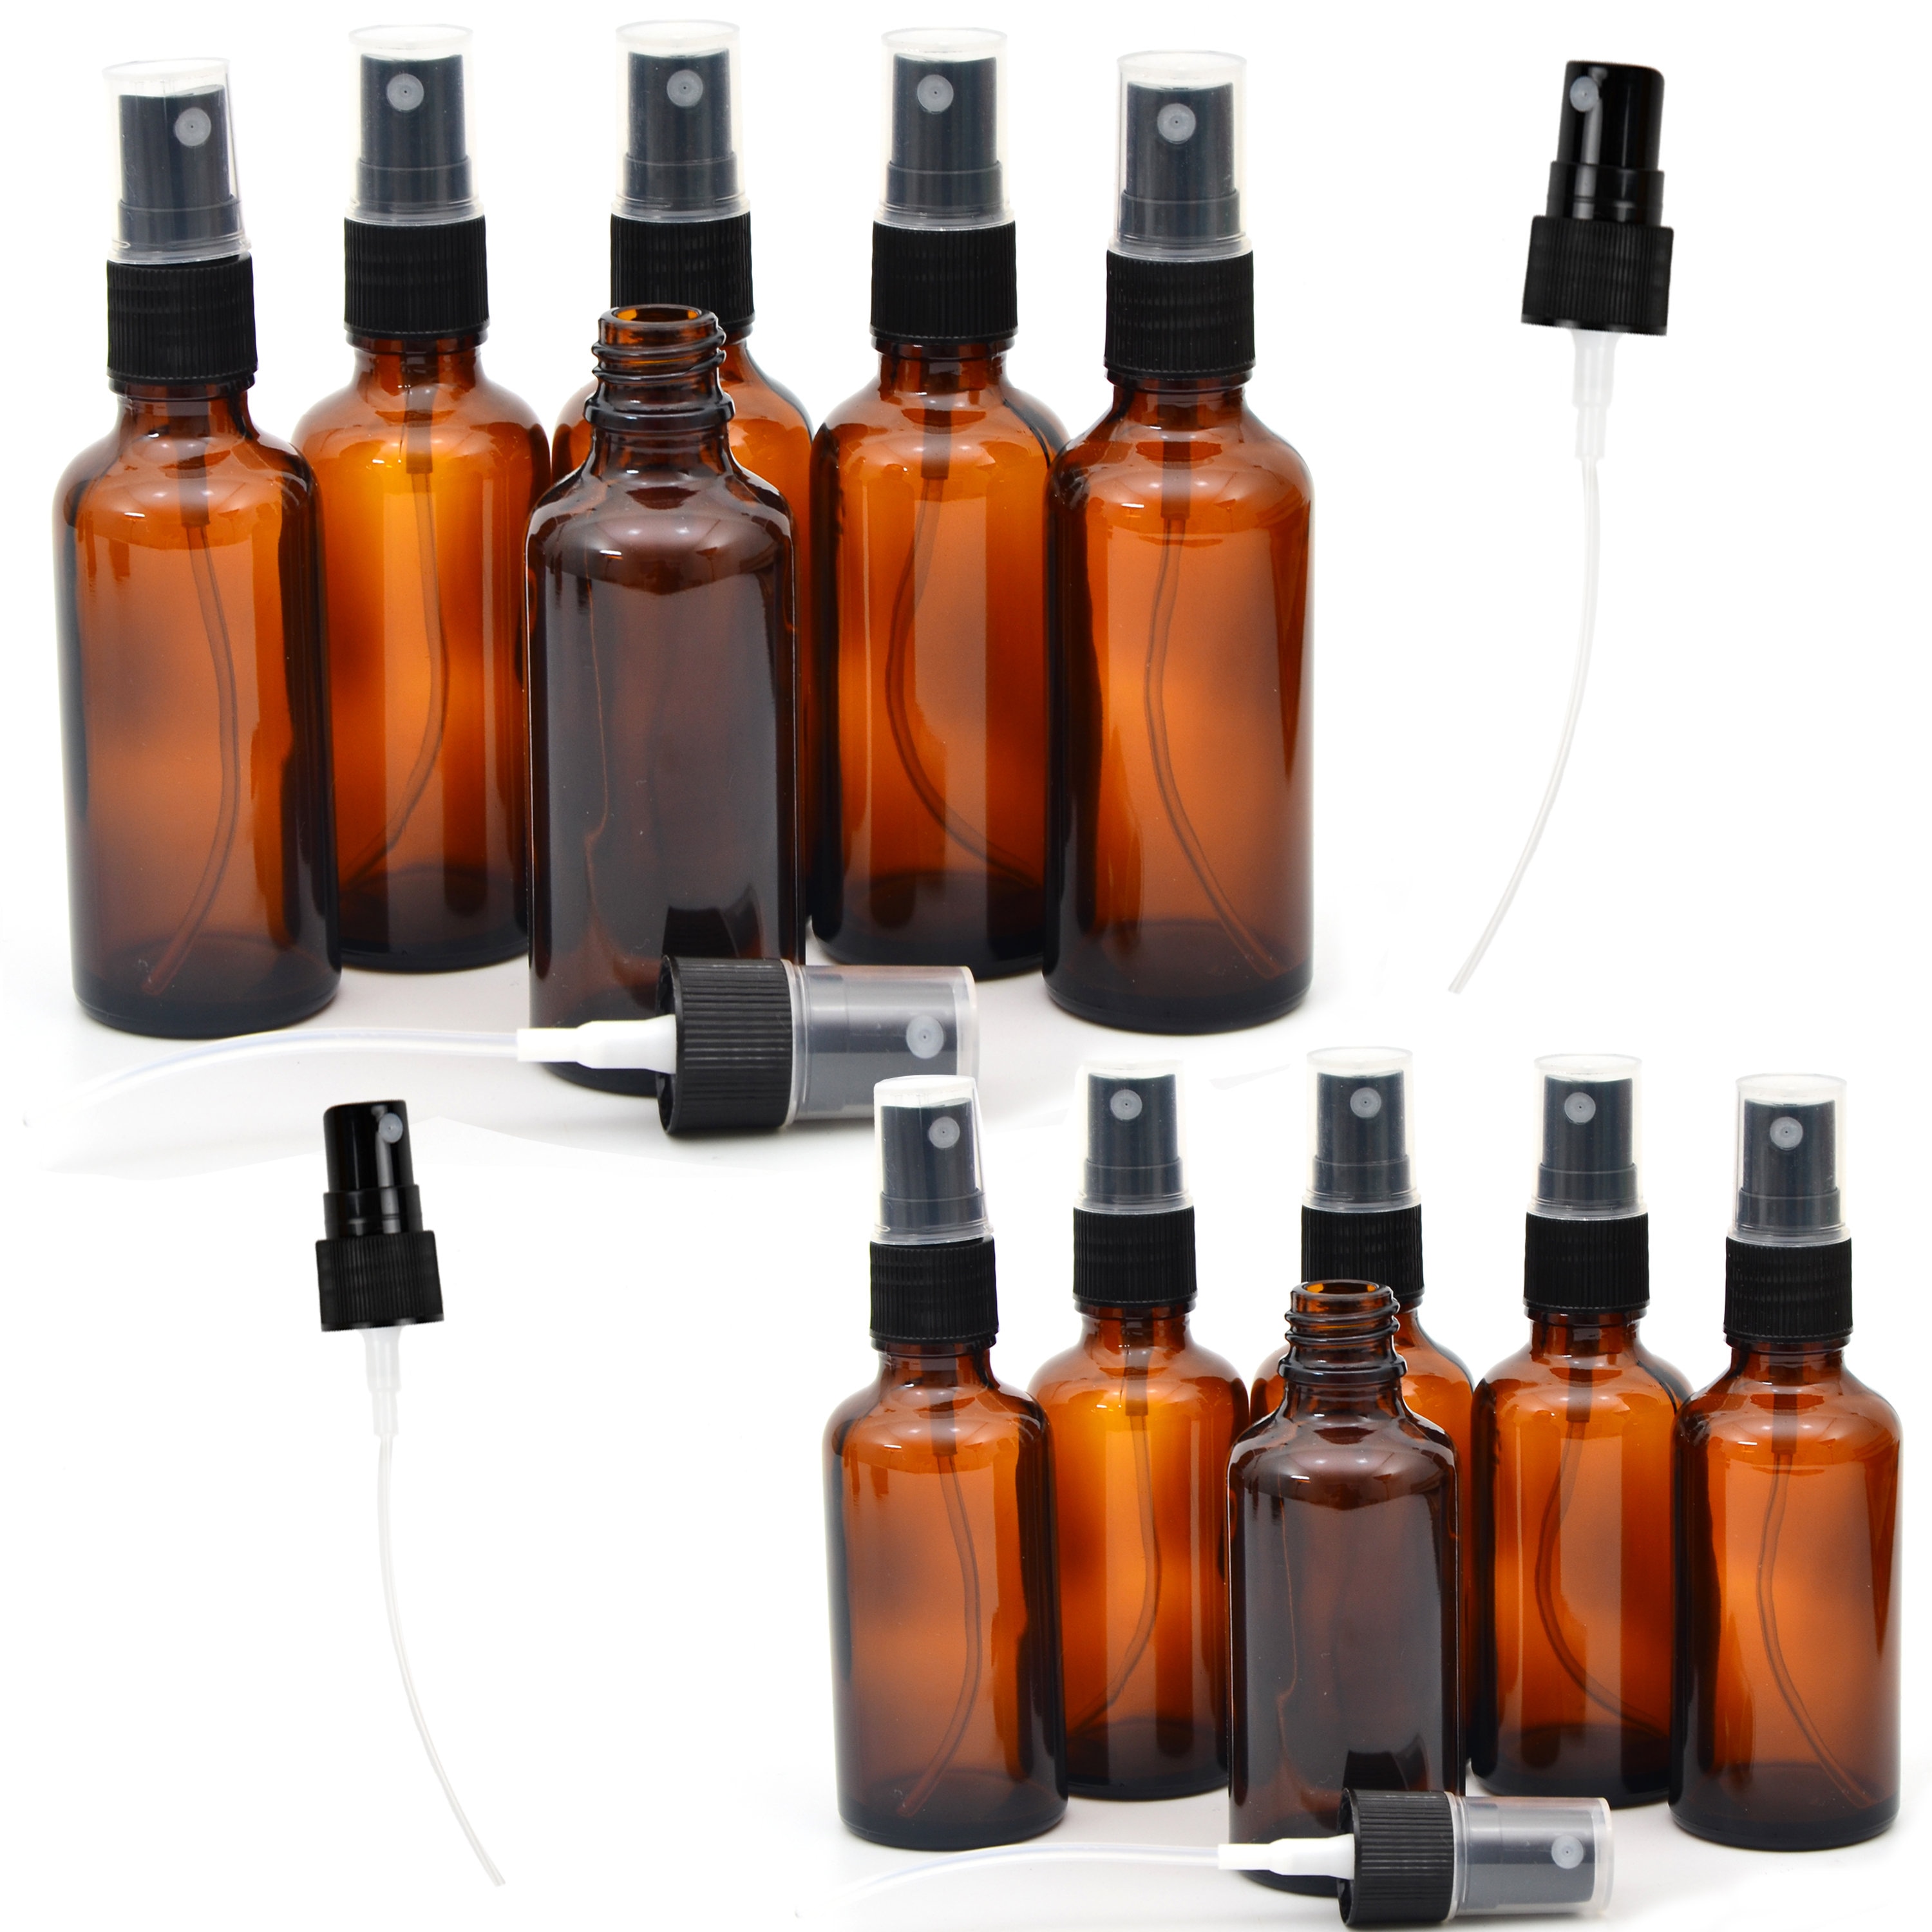 Large 32oz Amber Glass Spray Bottles with Funnel - Refillable Trigger  Sprayer Containers for Oils, Cleaning Products, Plant Misting, Cooking,  Hair